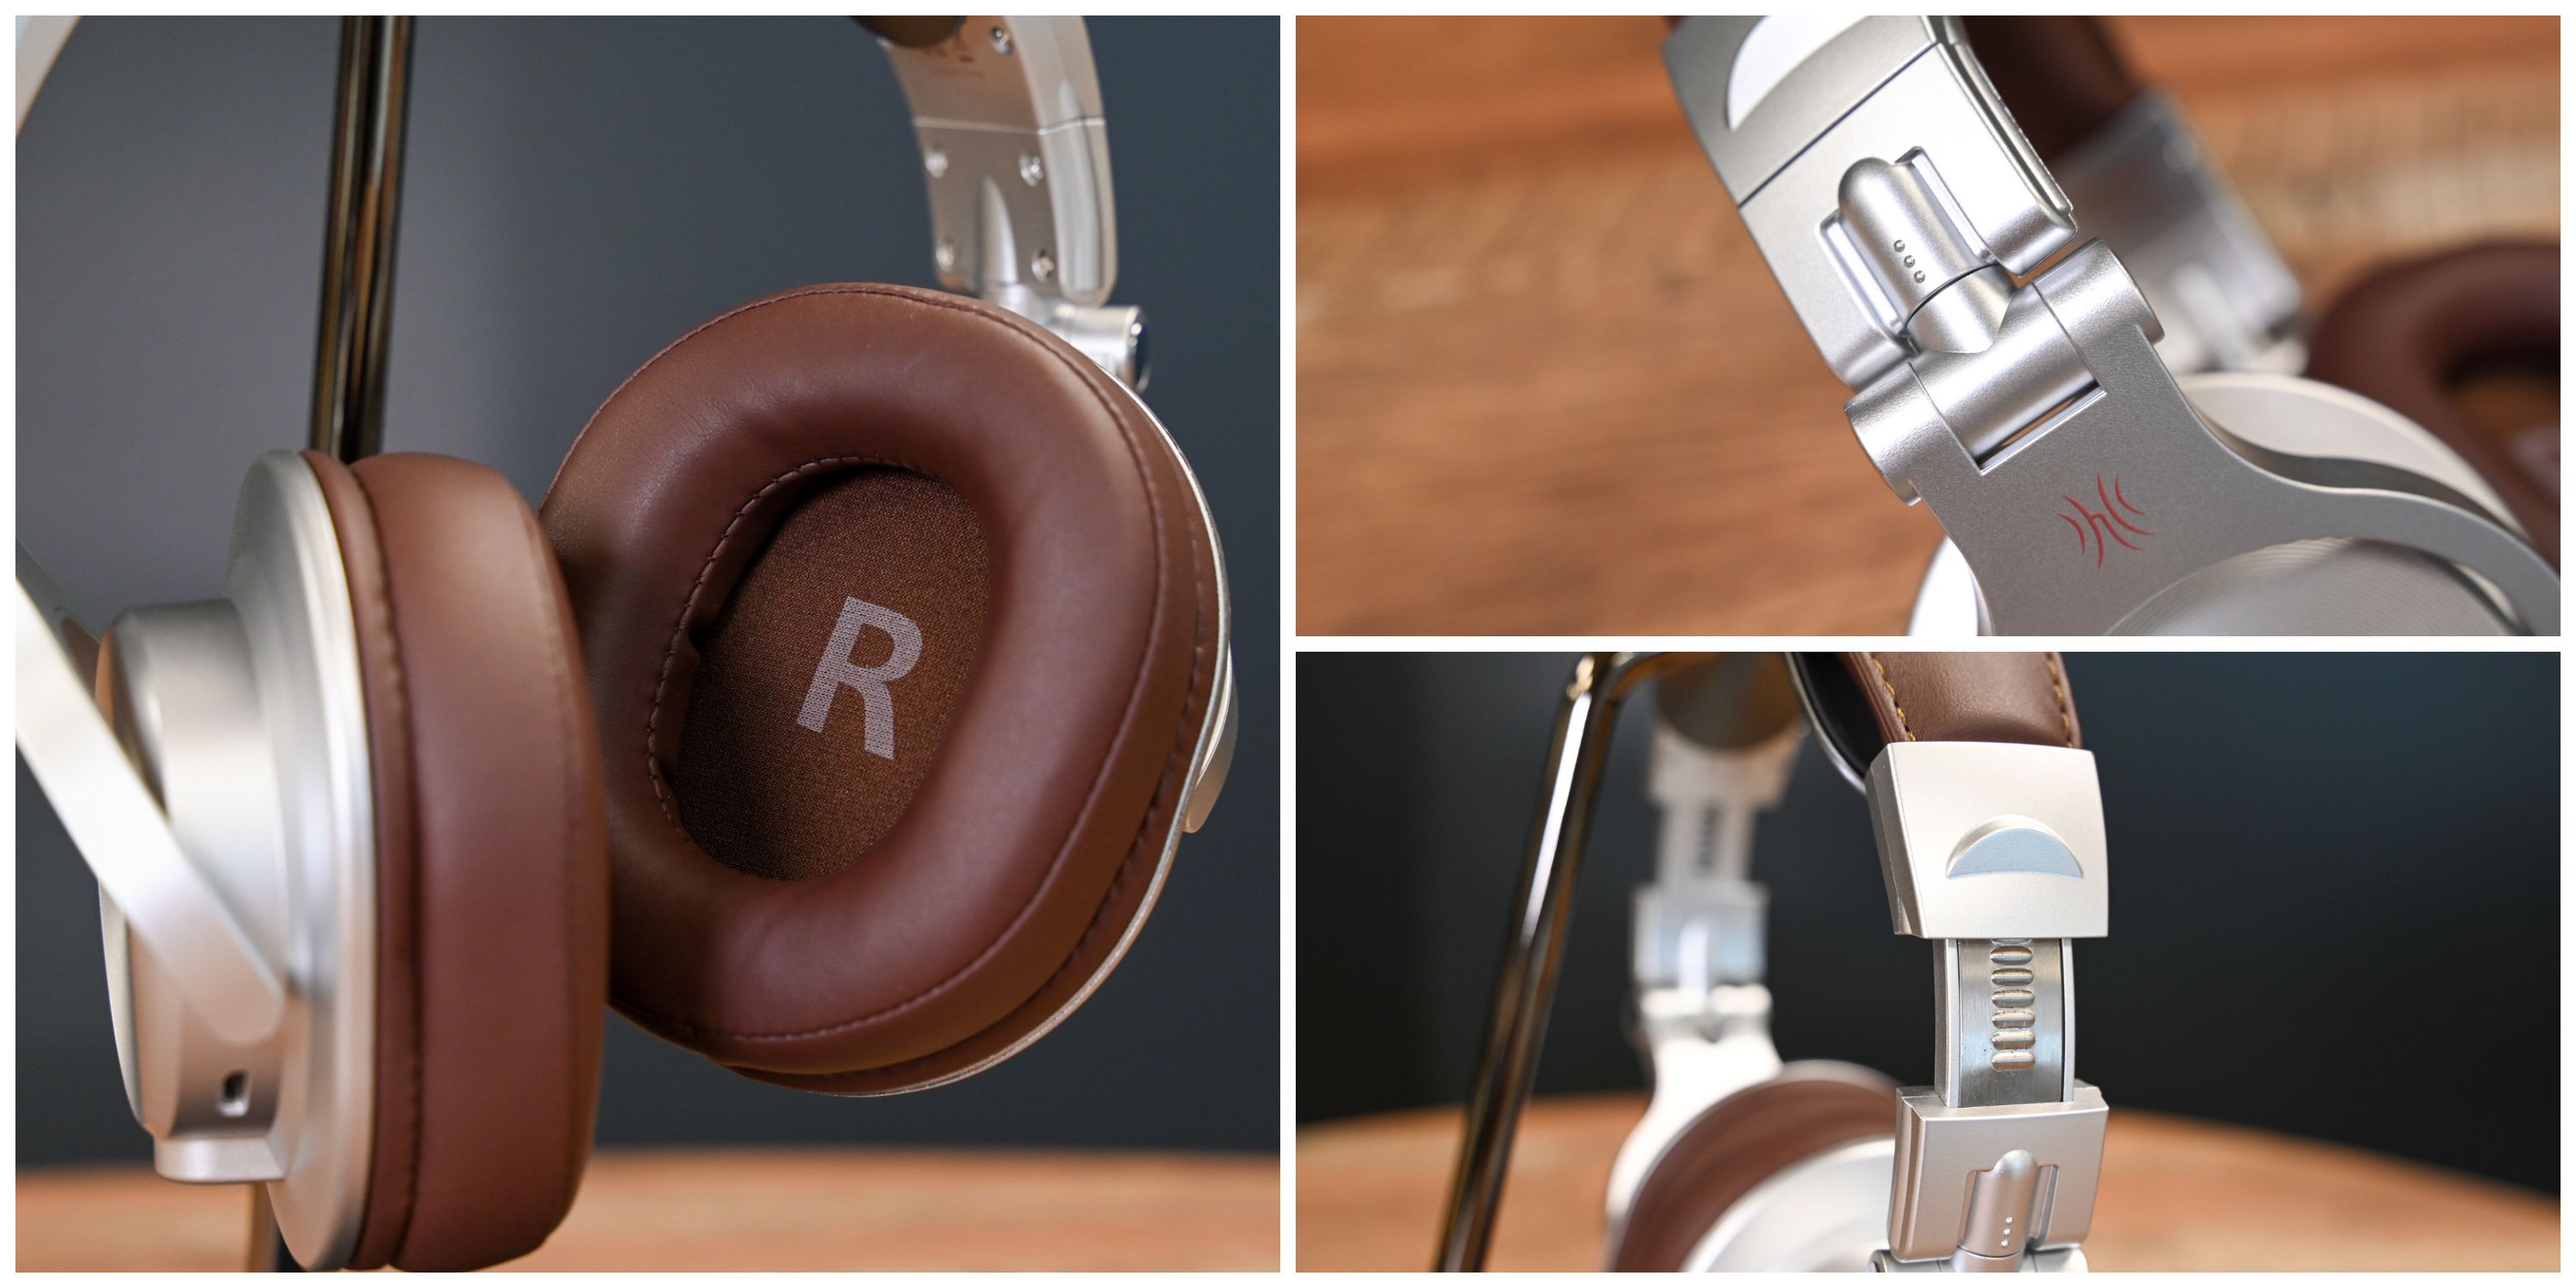 OneOdio A70 Headphones Review